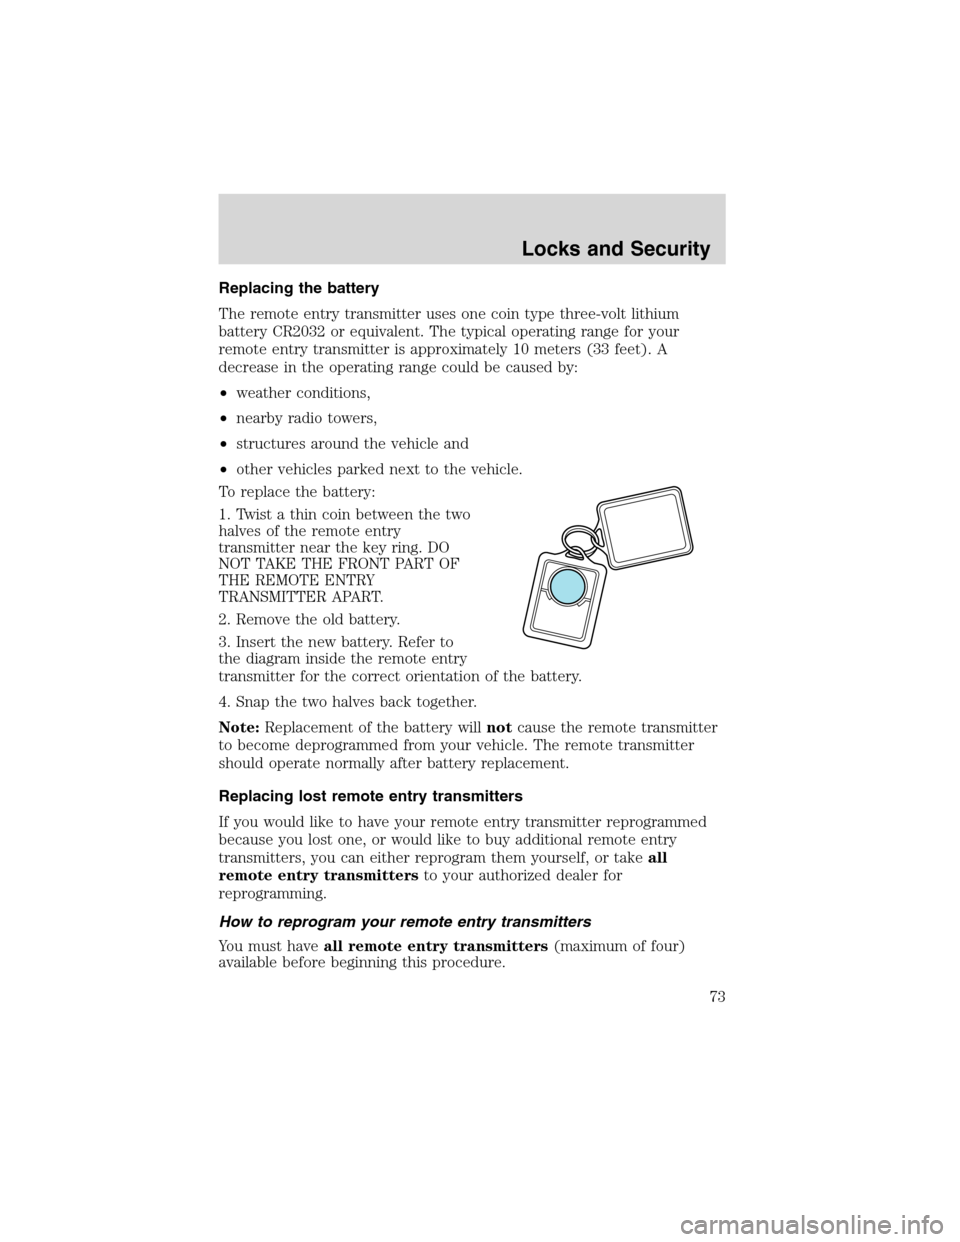 FORD E SERIES 2003 4.G Owners Manual Replacing the battery
The remote entry transmitter uses one coin type three-volt lithium
battery CR2032 or equivalent. The typical operating range for your
remote entry transmitter is approximately 10